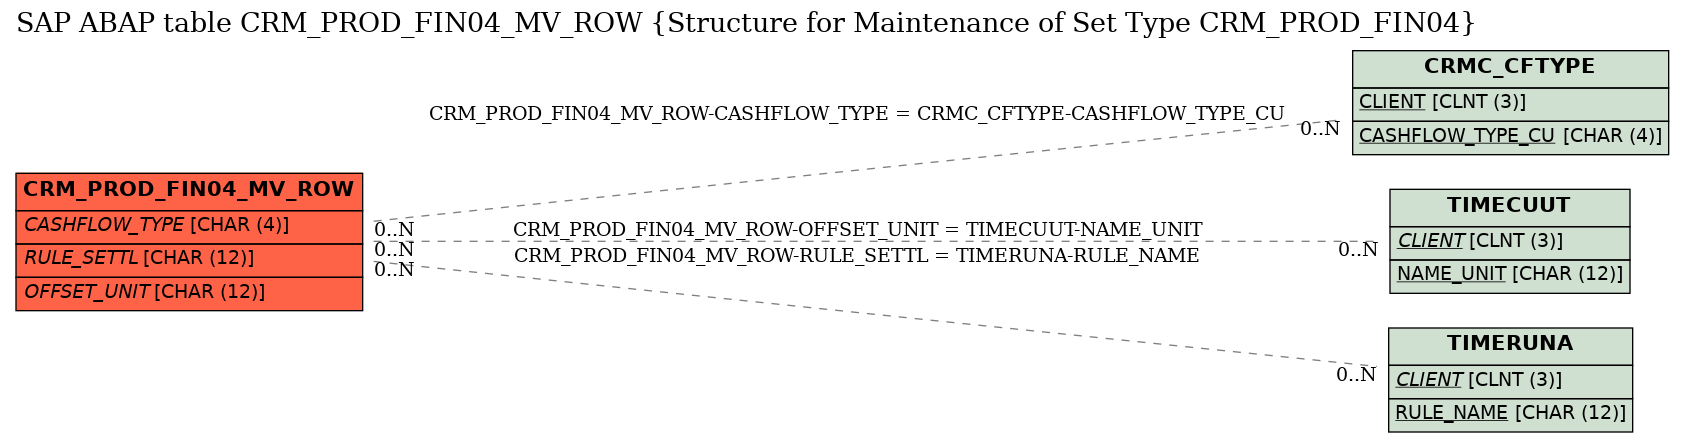 E-R Diagram for table CRM_PROD_FIN04_MV_ROW (Structure for Maintenance of Set Type CRM_PROD_FIN04)